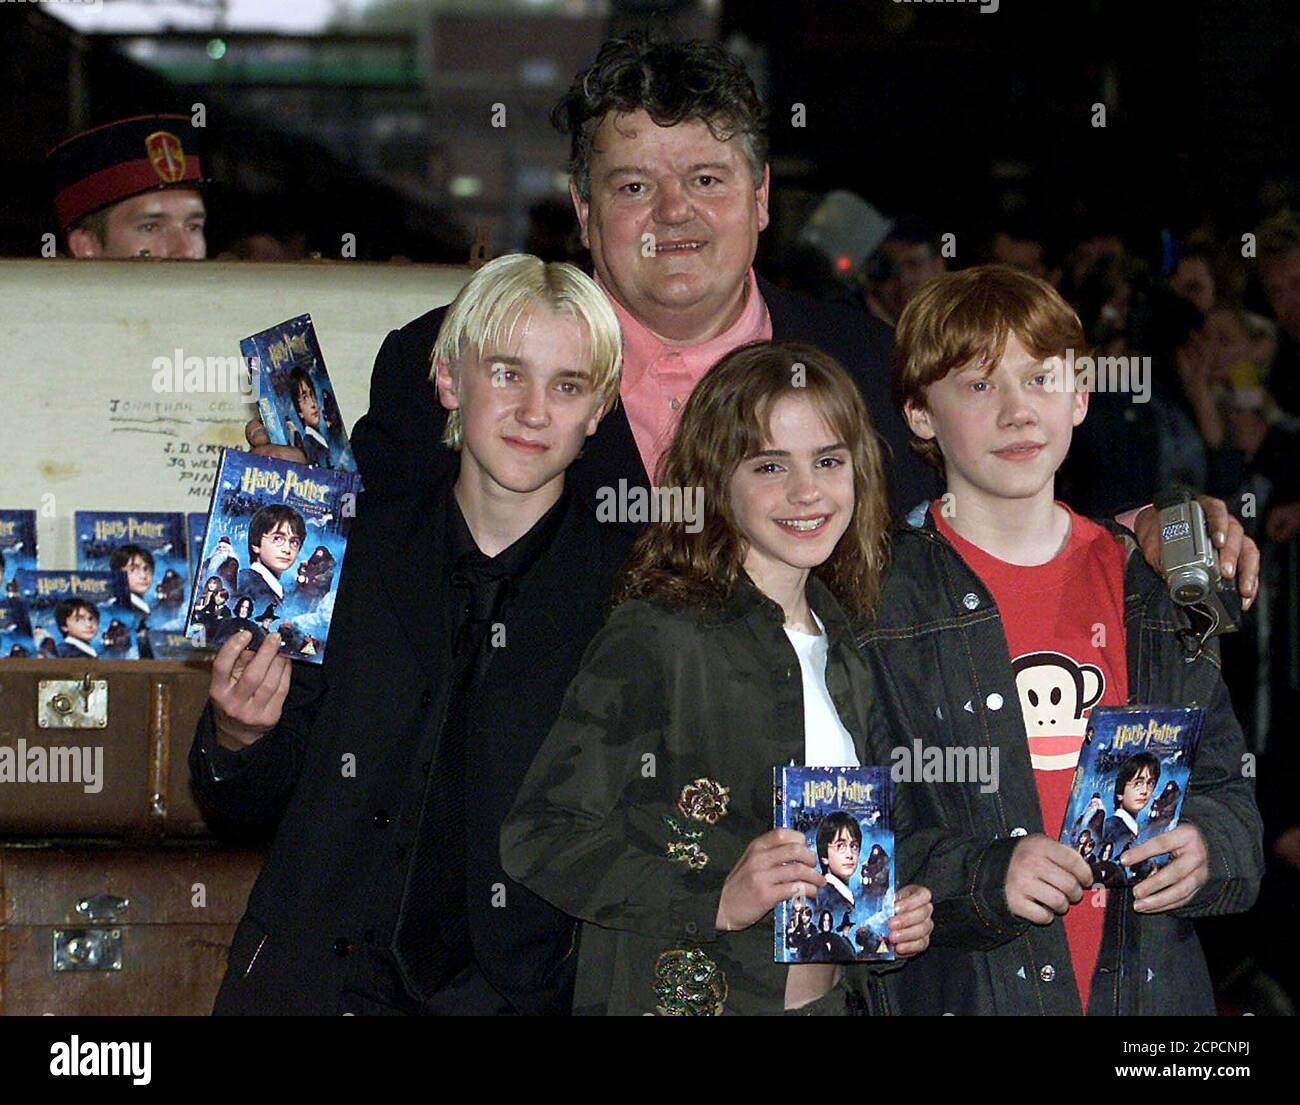 Cast members from the British movie Harry Potter and the Philosopher's Stone including, Tom Felton (L), Robbie Coltrane (2L), Emma Watson (2R) and Rupert Grint (R) attend the launch of for the DVD at London's Kings Cross Station May 8, 2002. Since the films release it has made an astonishing $962 million world wide making it the second biggest grossing film of all time. REUTERS/Russell Boyce  RB/NMB Stock Photo